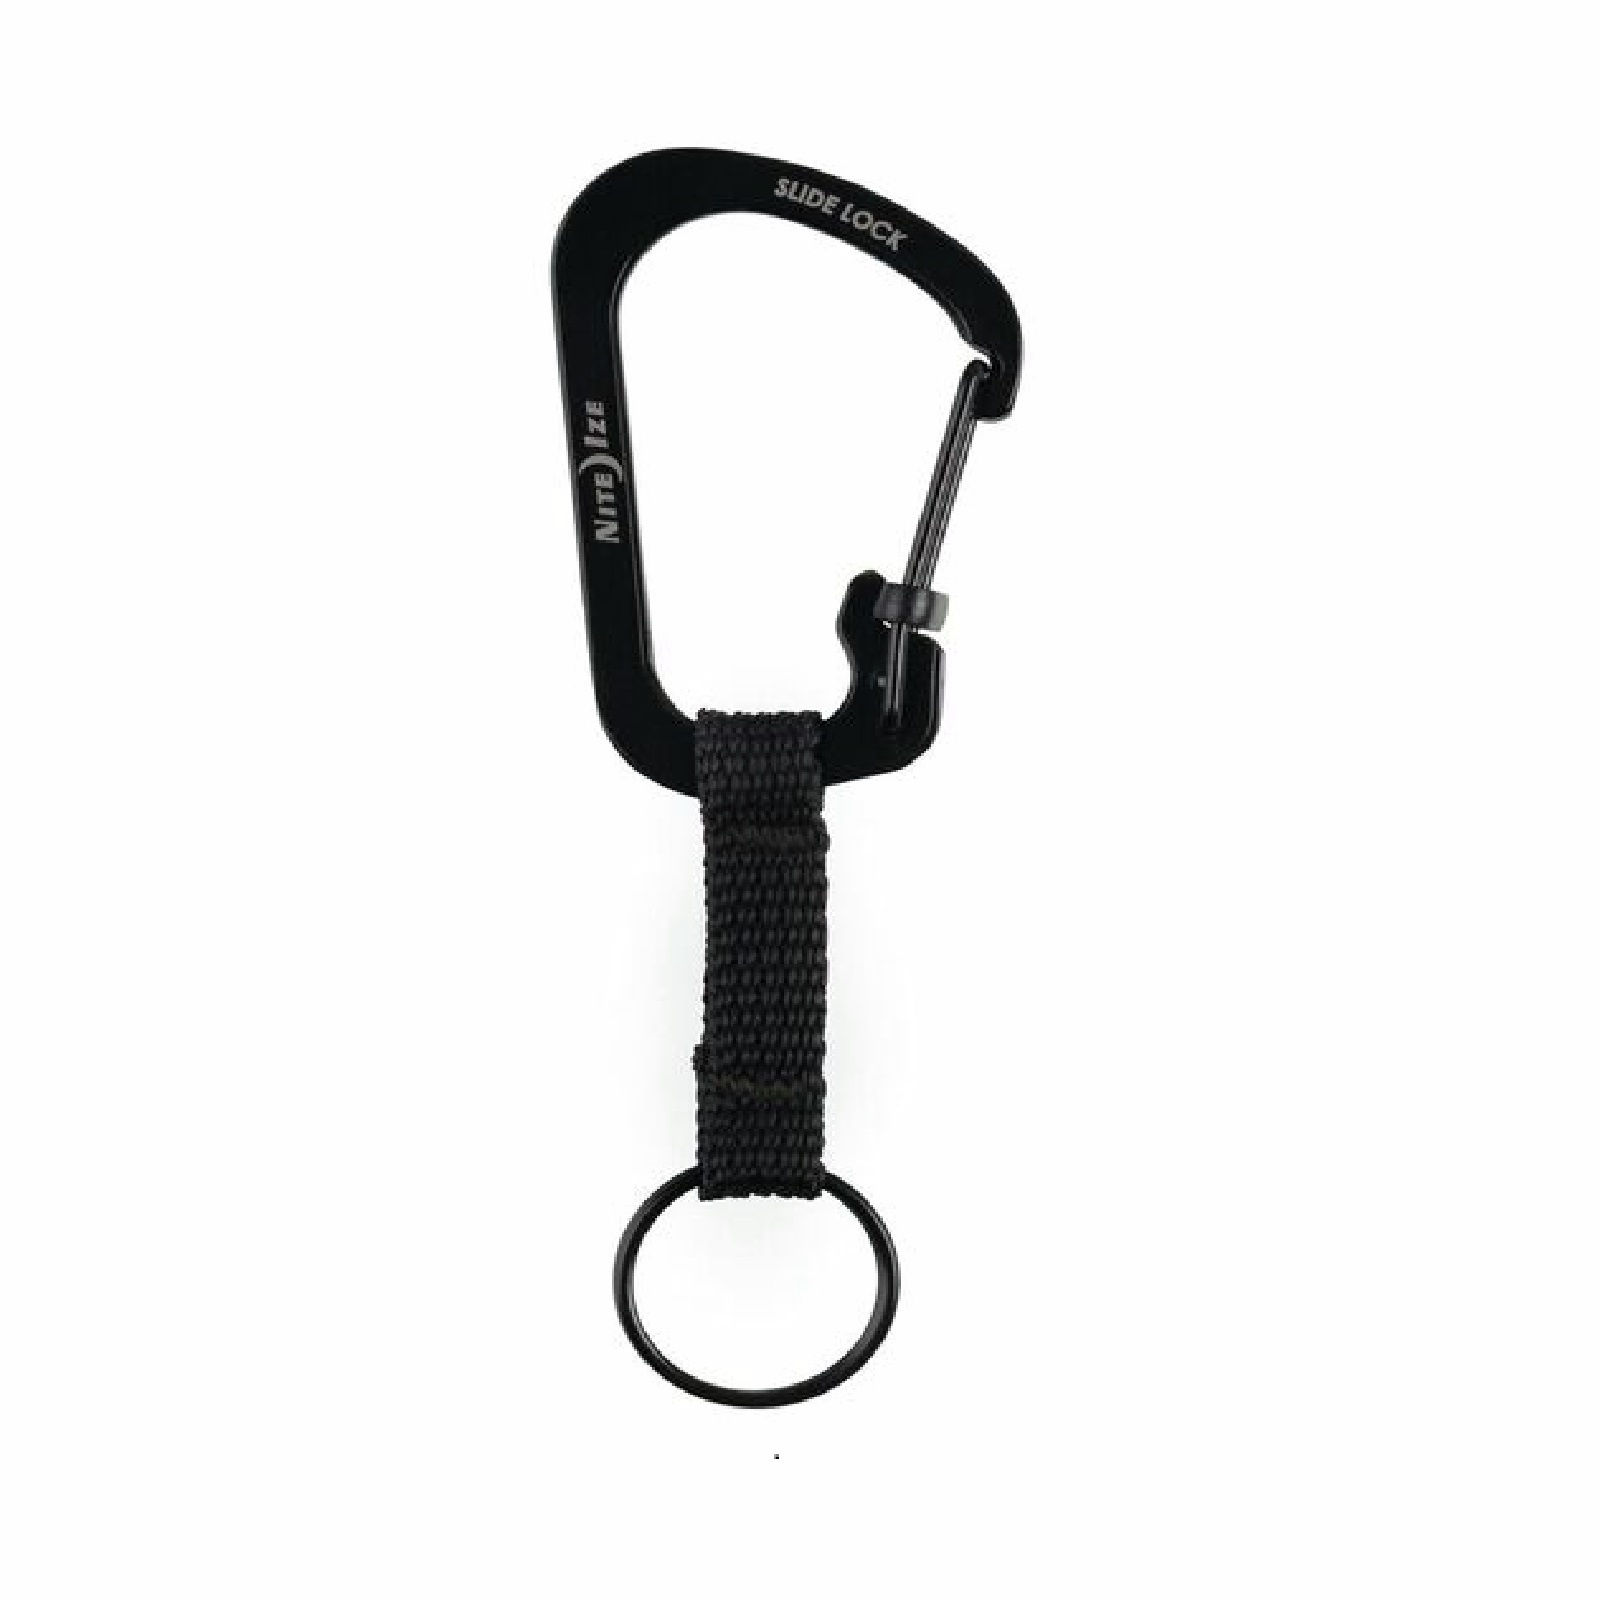 2Pcs Leather Rope KeyChain Hand Woven Horseshoe Buckle Key Ring Car Key  Rings For Car Fashion Key Accessory Keyrings Gifts